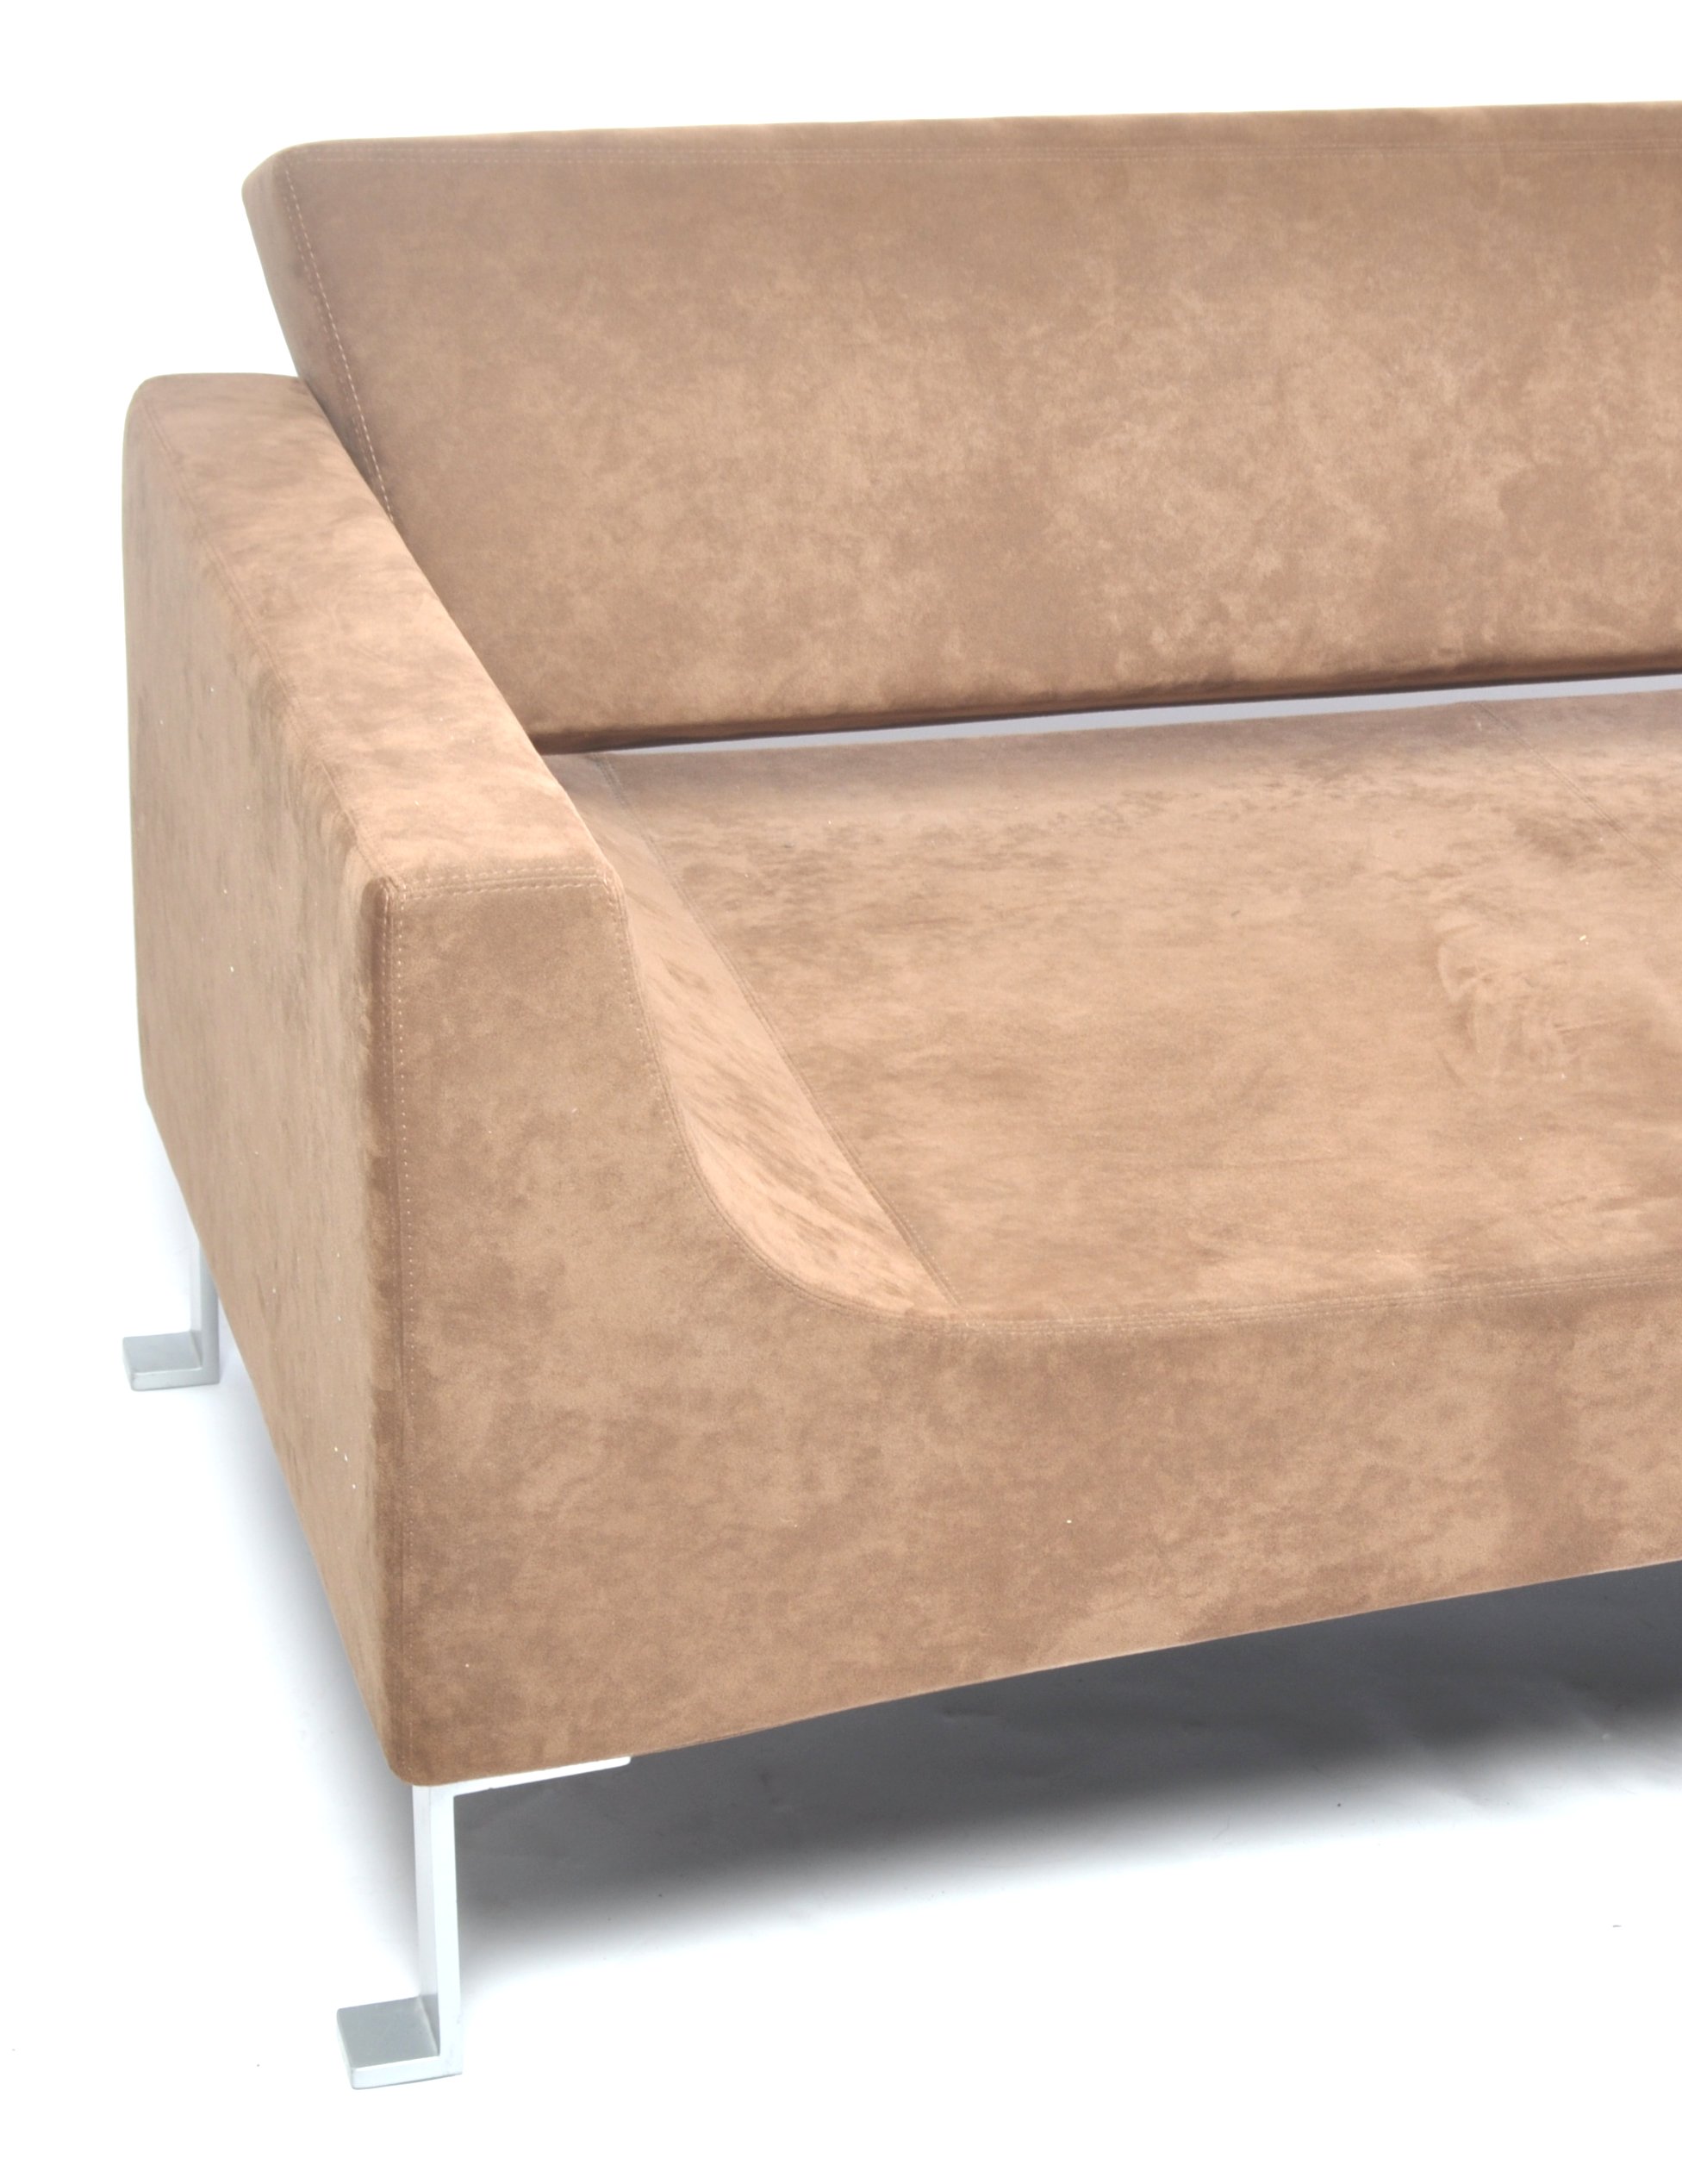 ANTIDIVA MR NILSSON FAUX SUEDE LEATHER SOFA SETTEE BY DUILIO FORTE - Image 2 of 6